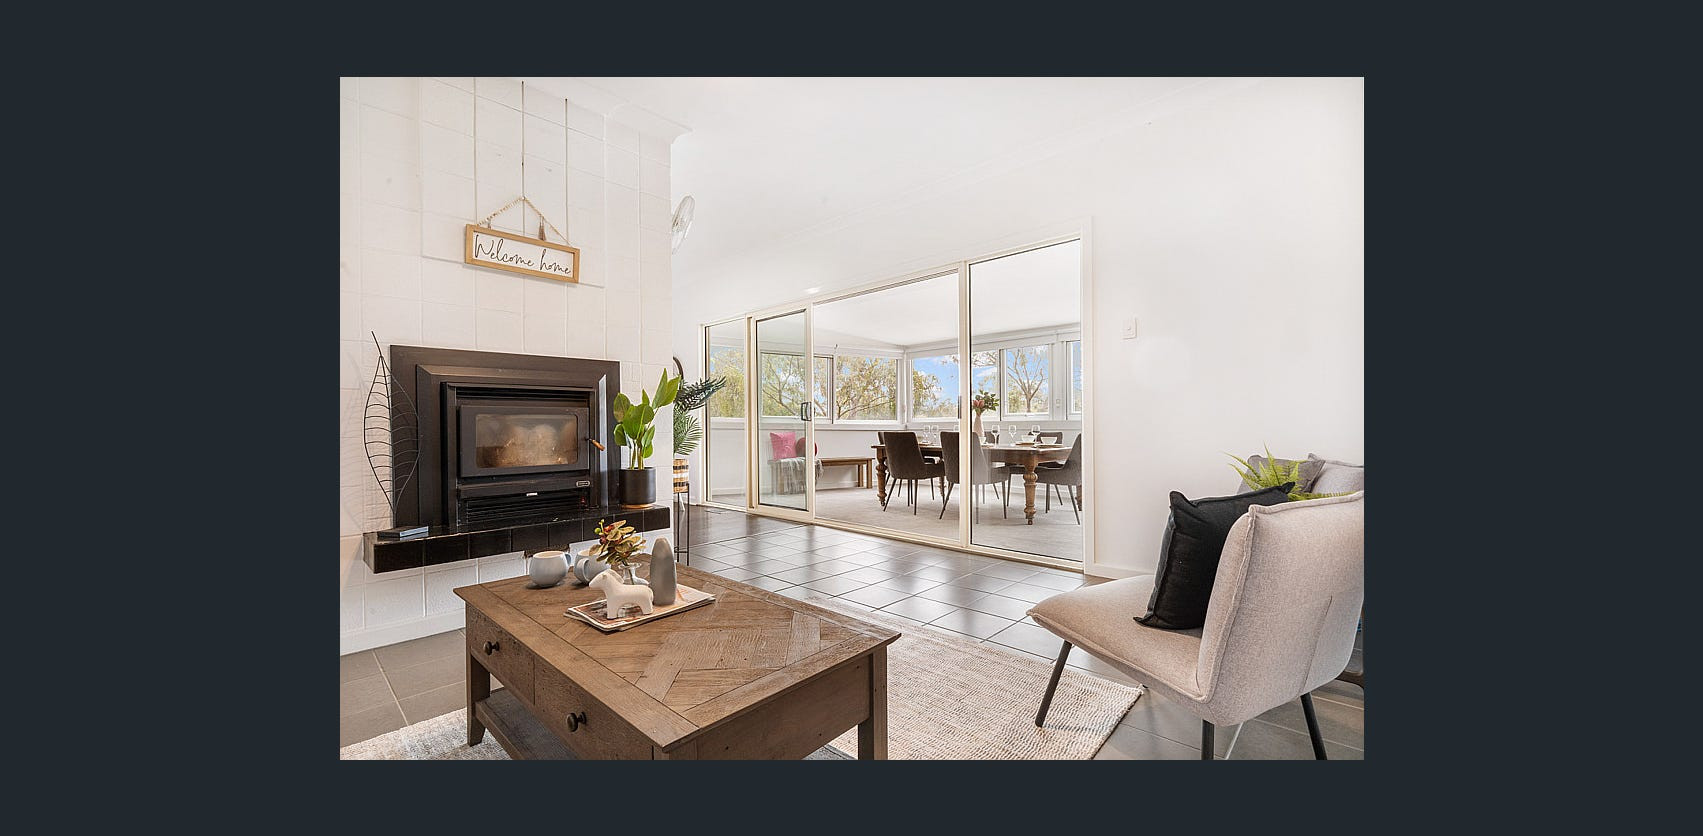 Partial Staging - 7 Myall Ave, Blackwood